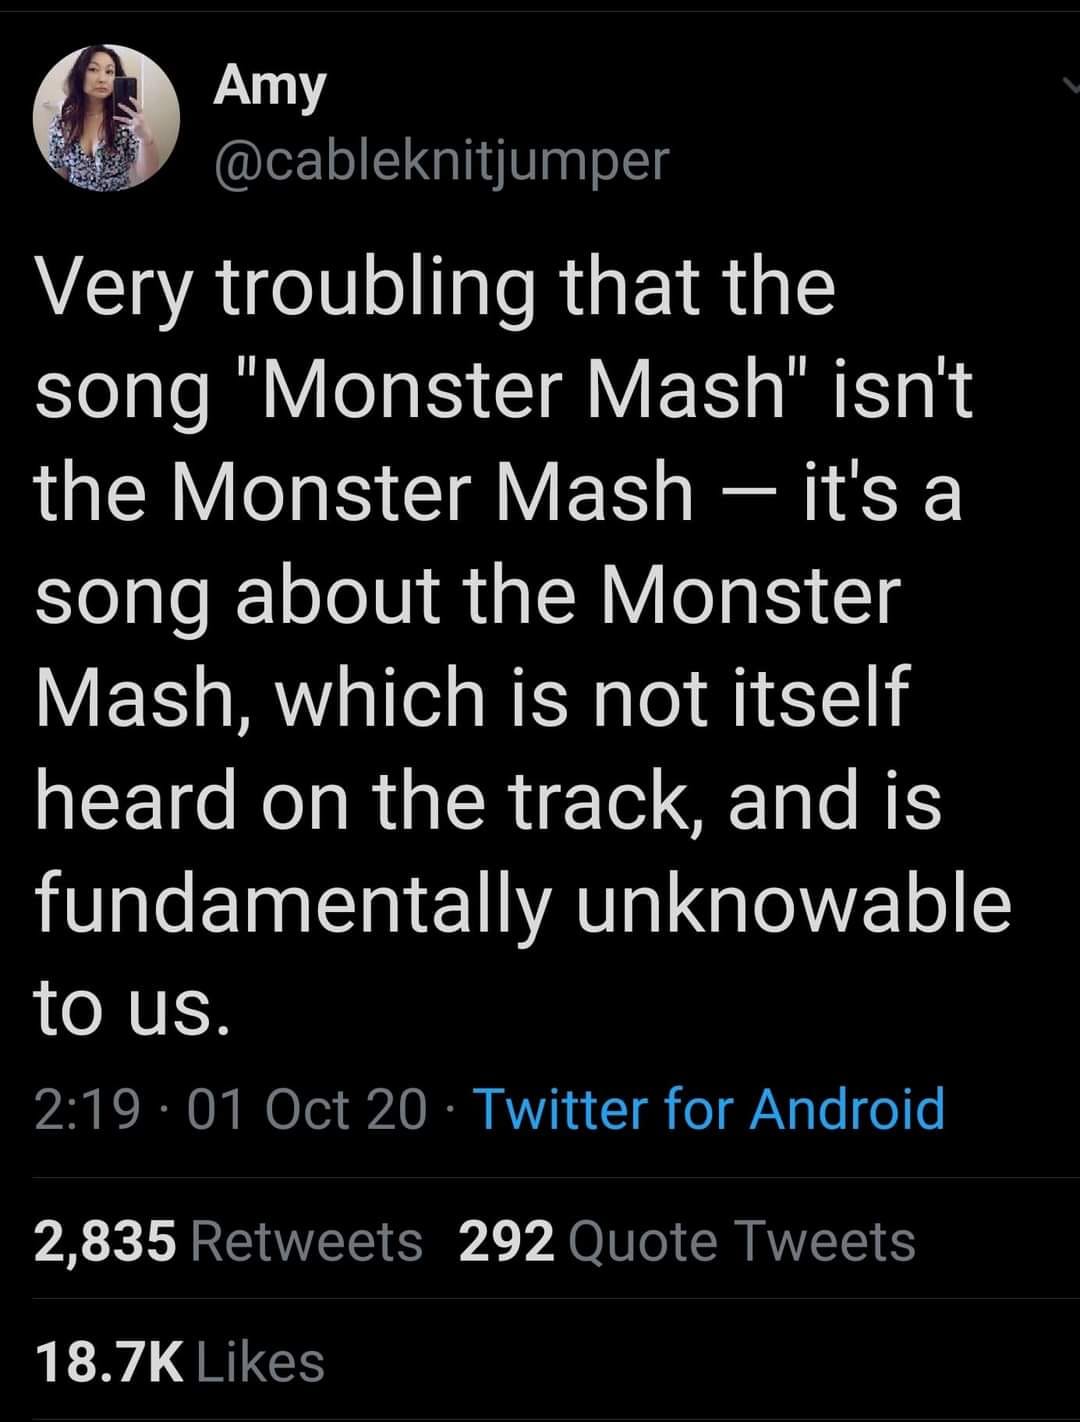 screenshot - Amy Very troubling that the song "Monster Mash" isn't the Monster Mash it's a song about the Monster Mash, which is not itself heard on the track, and is fundamentally unknowable to us. 01 Oct 20 Twitter for Android 2,835 292 Quote Tweets